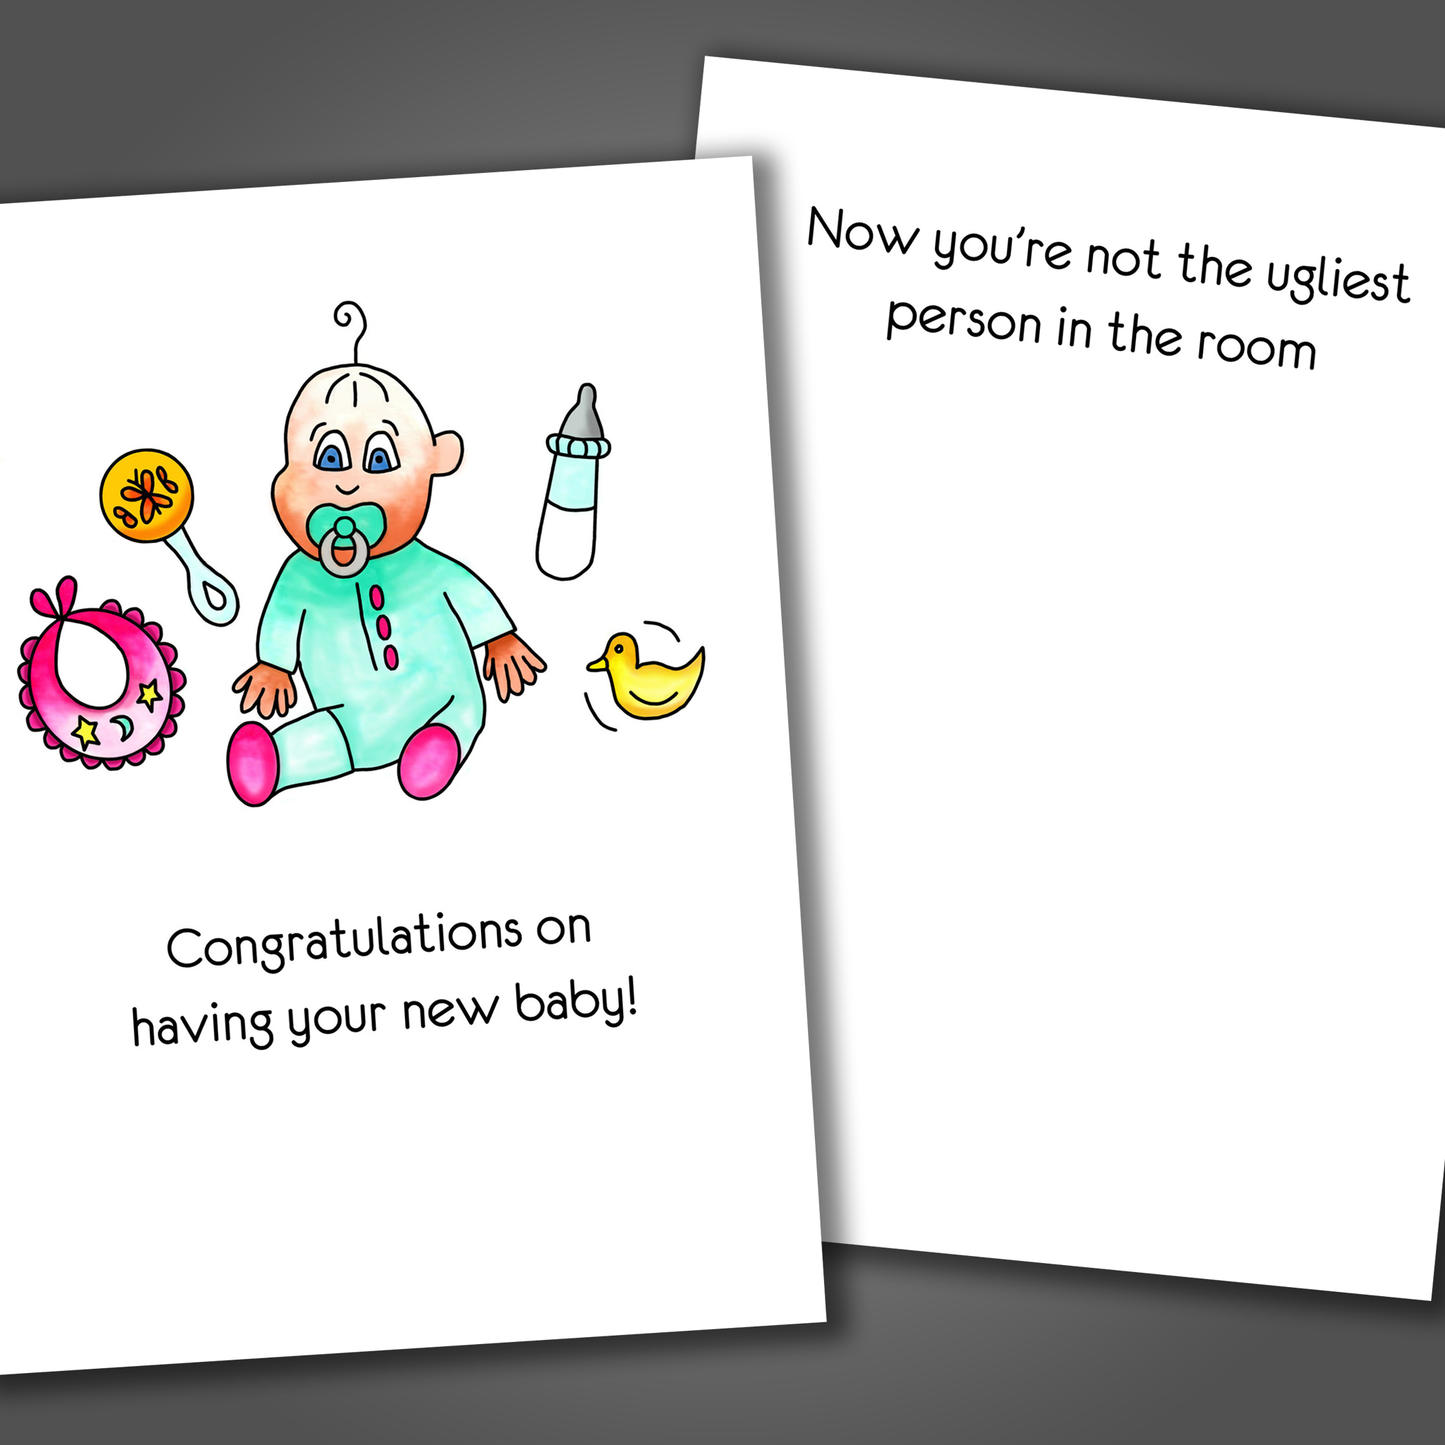 Funny new baby or adoption card with cute baby sitting with toys on front of card. Inside is a funny joke that says now you're not the ugliest person in the room!